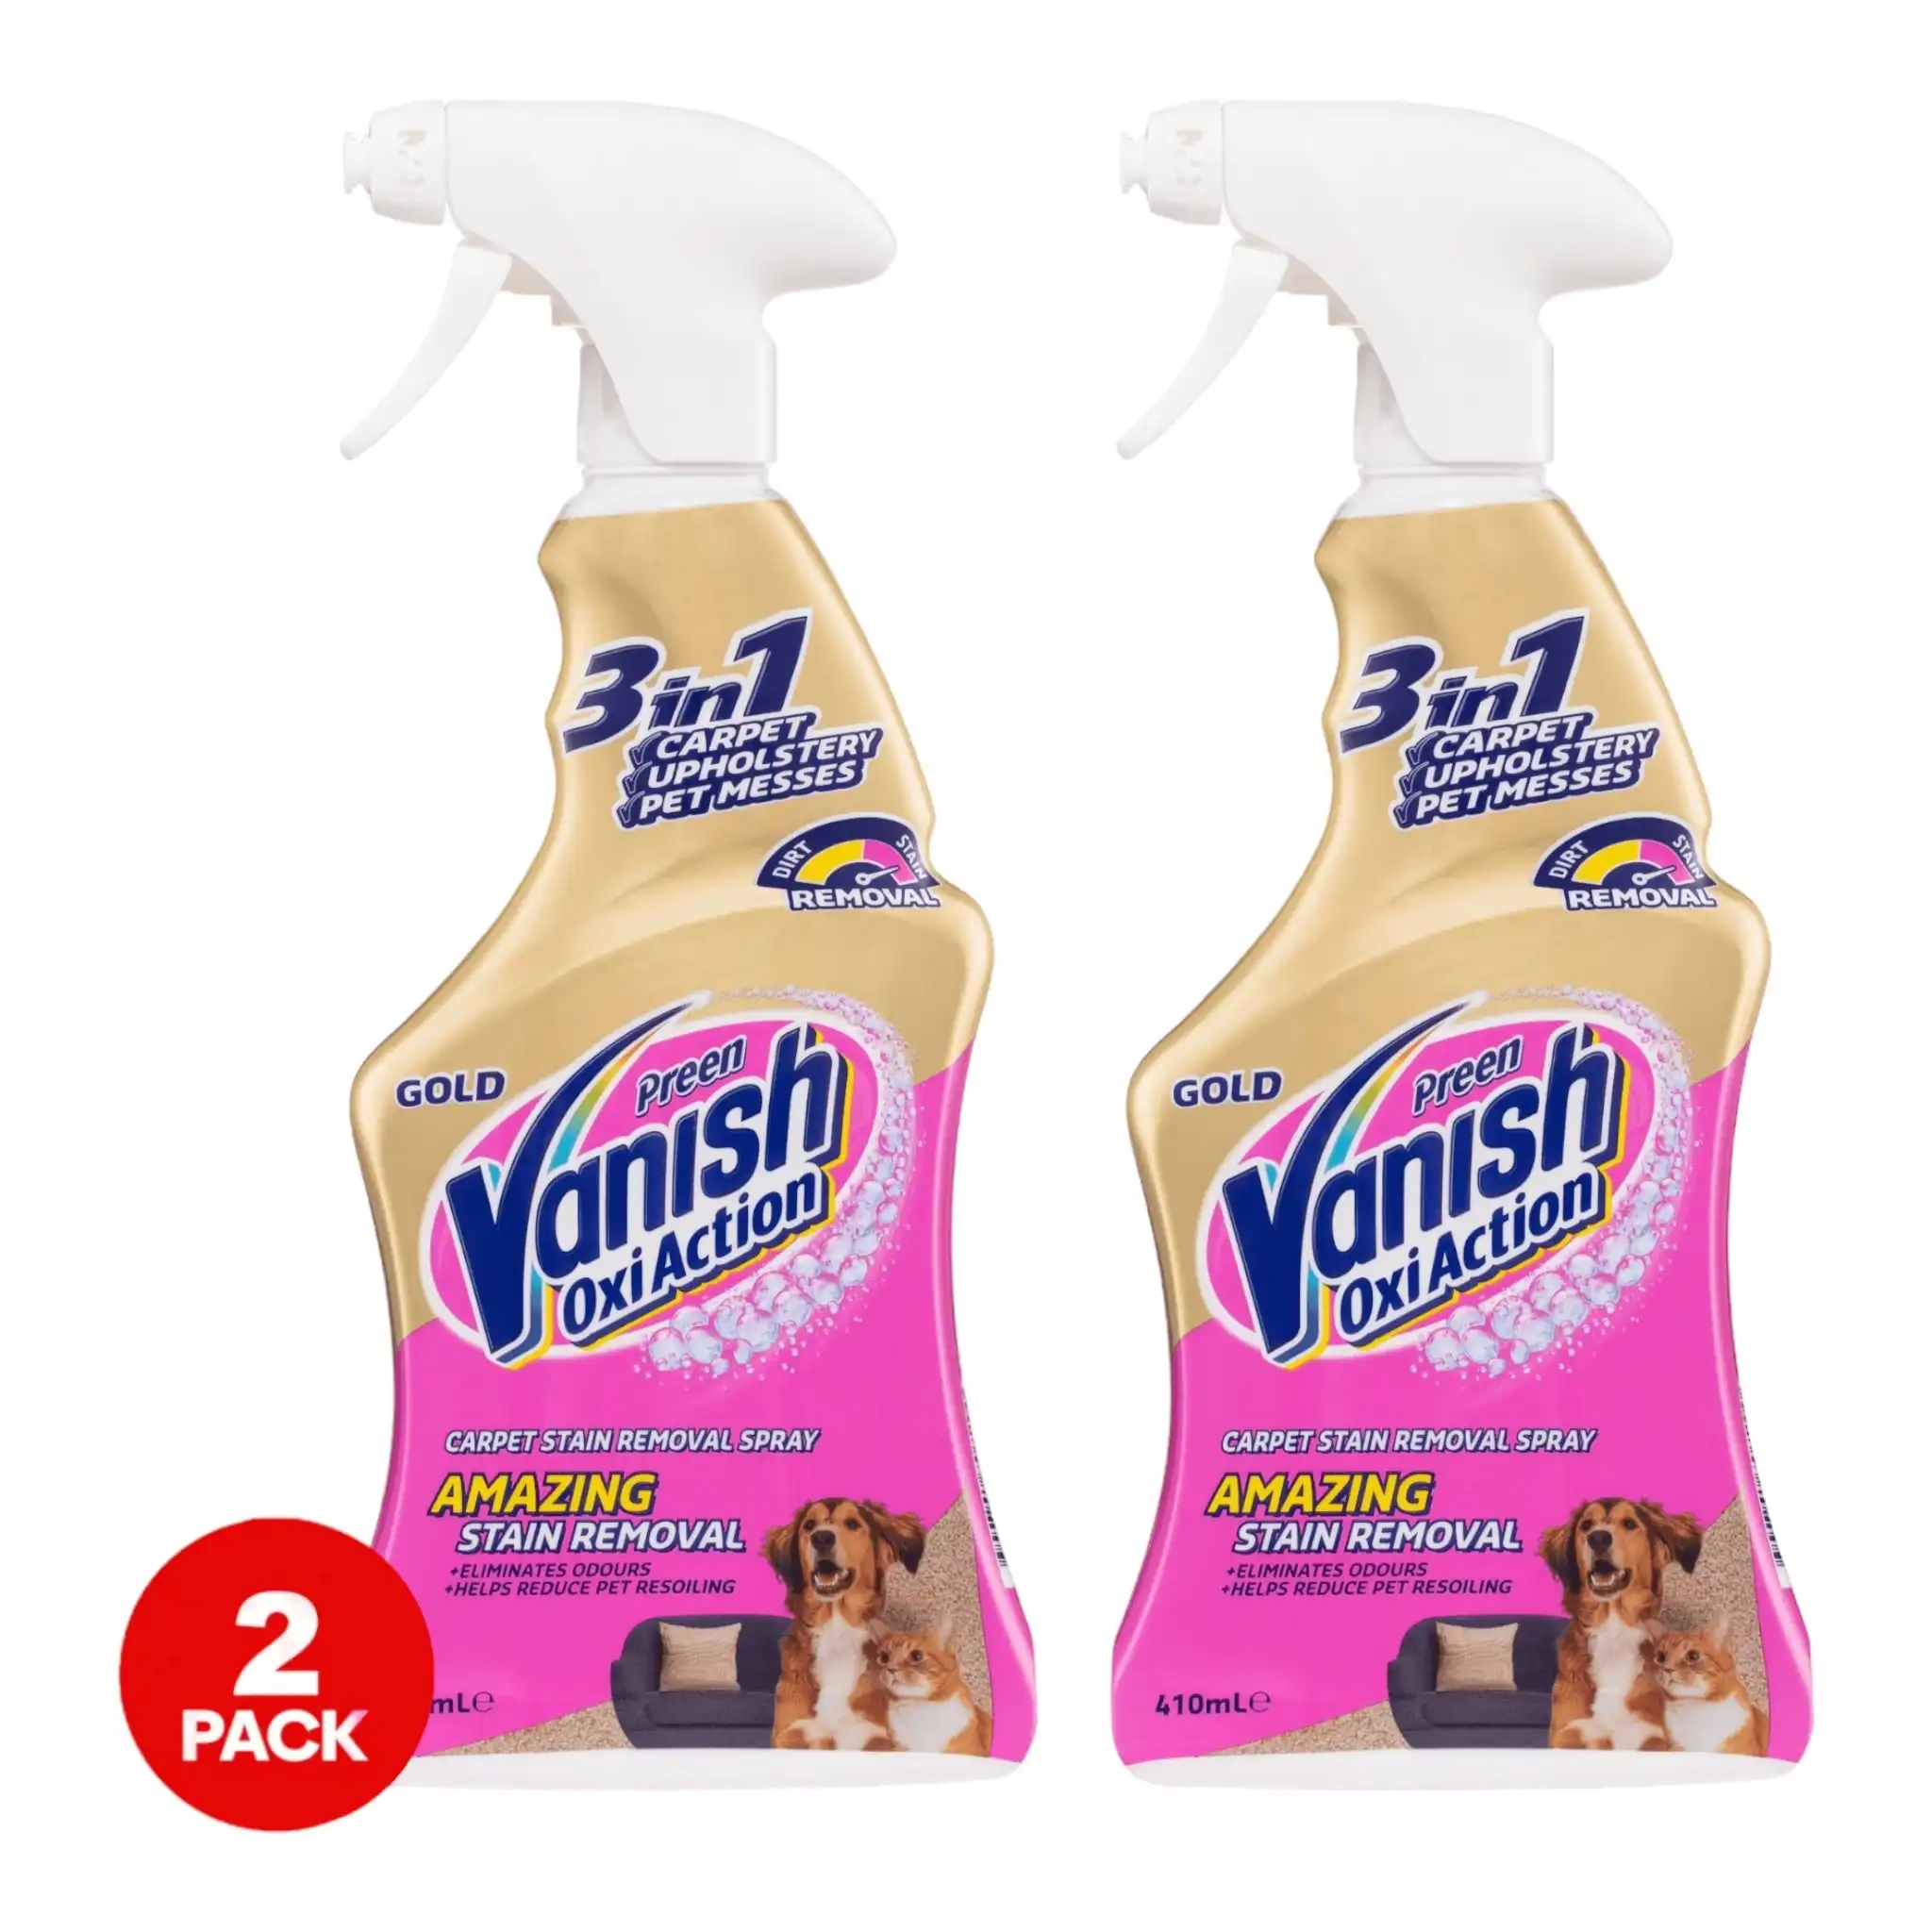 2 Pack Vanish Preen Gold Pro Oxi Action 3 in 1 Carpet Stain Remover 410mL